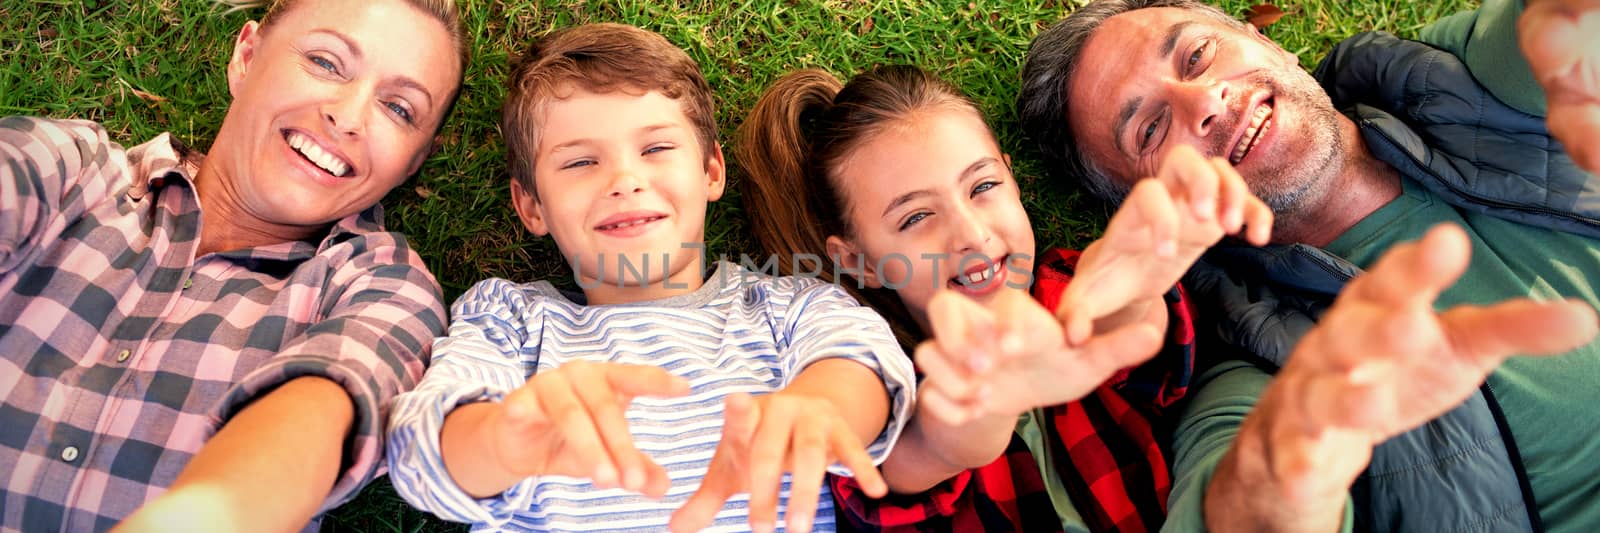 Happy family lying on the grass and making hand gestures by Wavebreakmedia